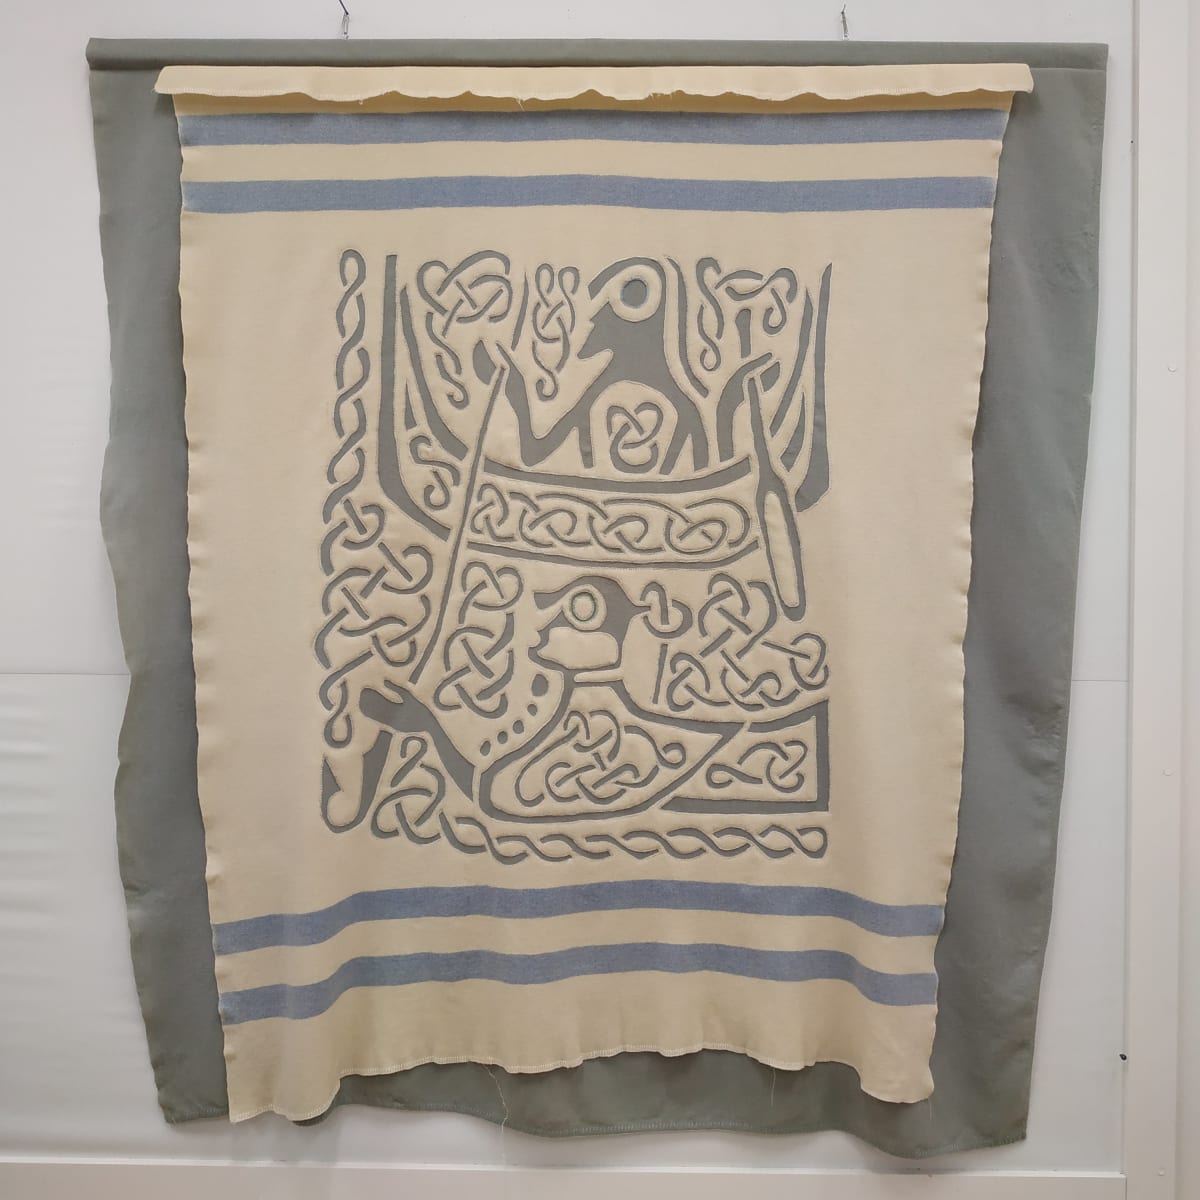 Origins 1 by Lesley Turner  Image: Lesley Turner, 'Origins 1', 2019, 77"h x 71"w x 1"d. Vintage wool blankets hand and machine stitched and cut back applique. When people move from one place to another taking with them their genetic make-up they pass it on to future generations. 